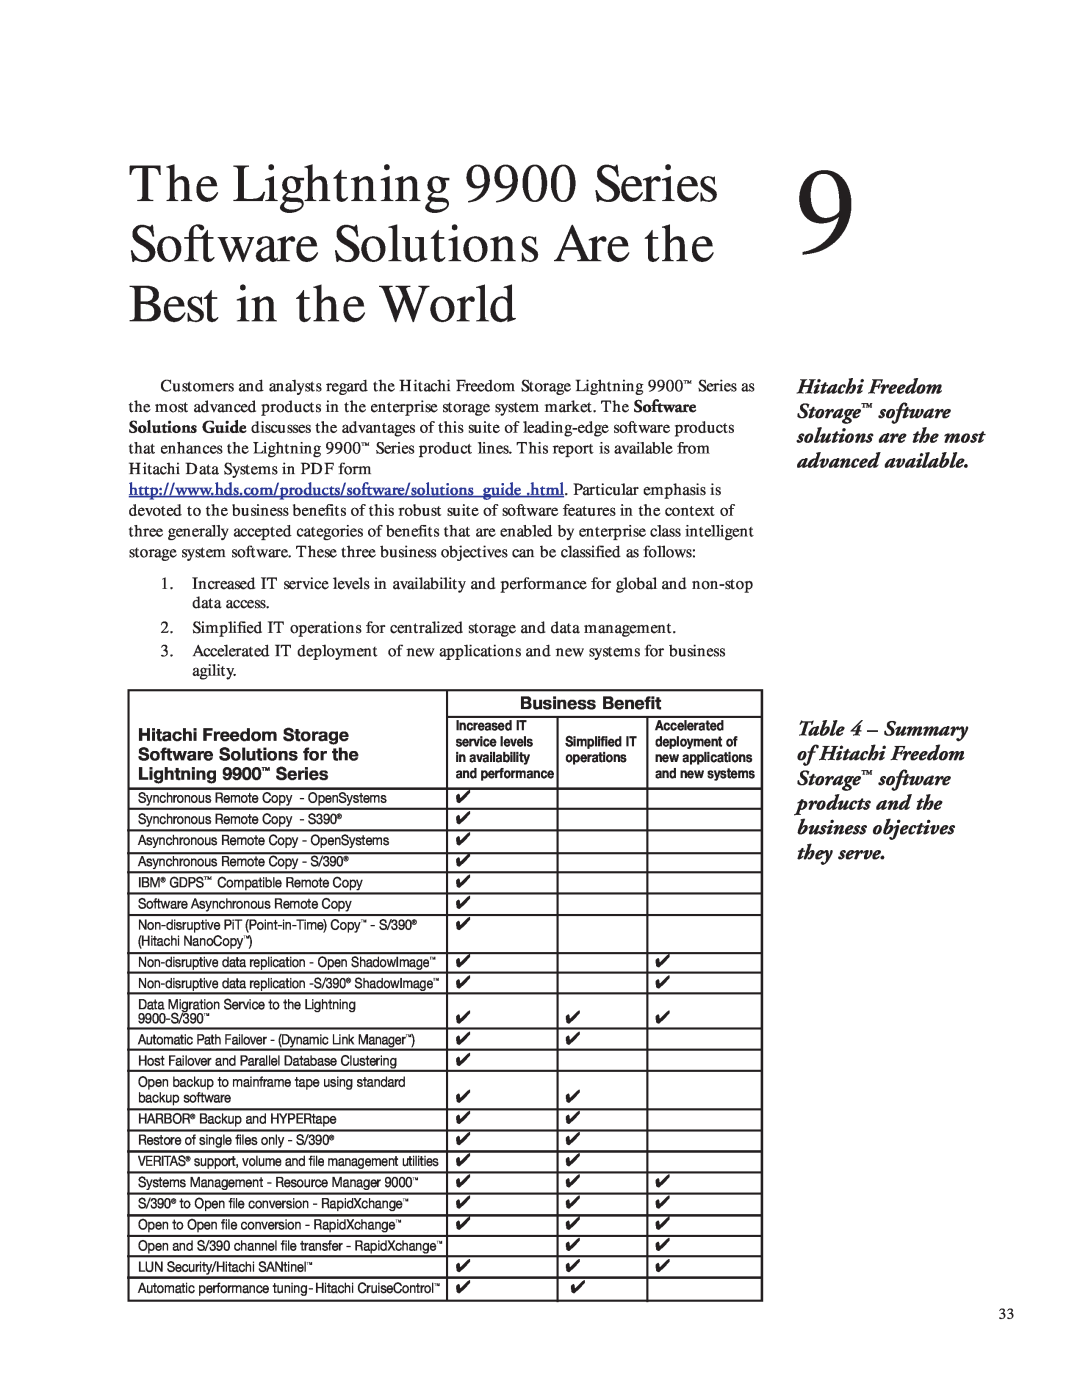 Hitachi 9960 manual Software Solutions Are the, Best in the World, The Lightning 9900 Series, Business Benefit 